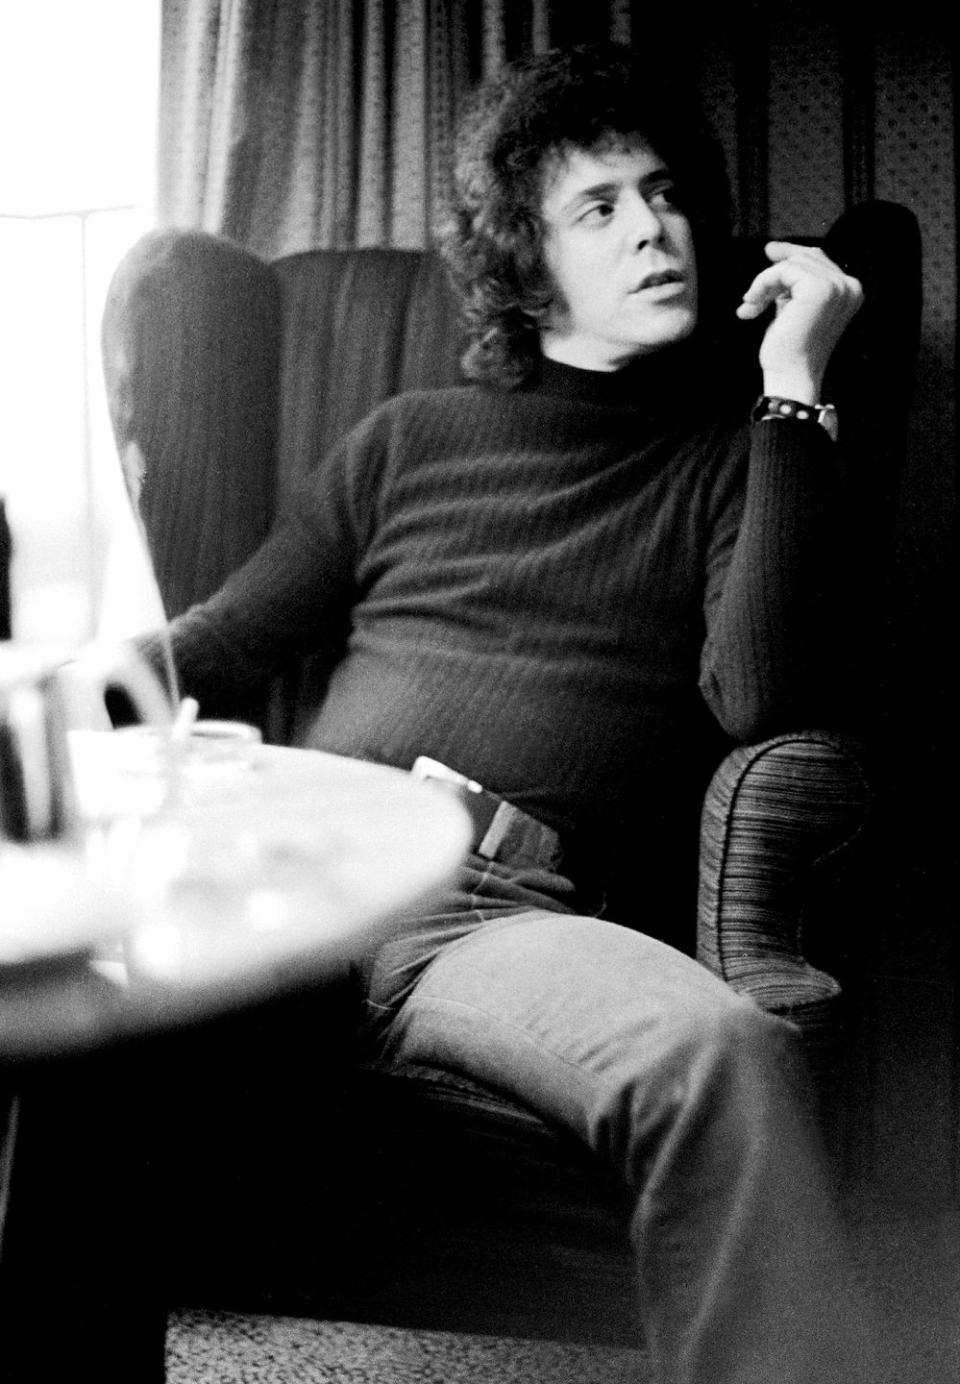 lou reed sits in an armchair and looks to the right, he wears a dark long sleeve shirt and pants with a belt